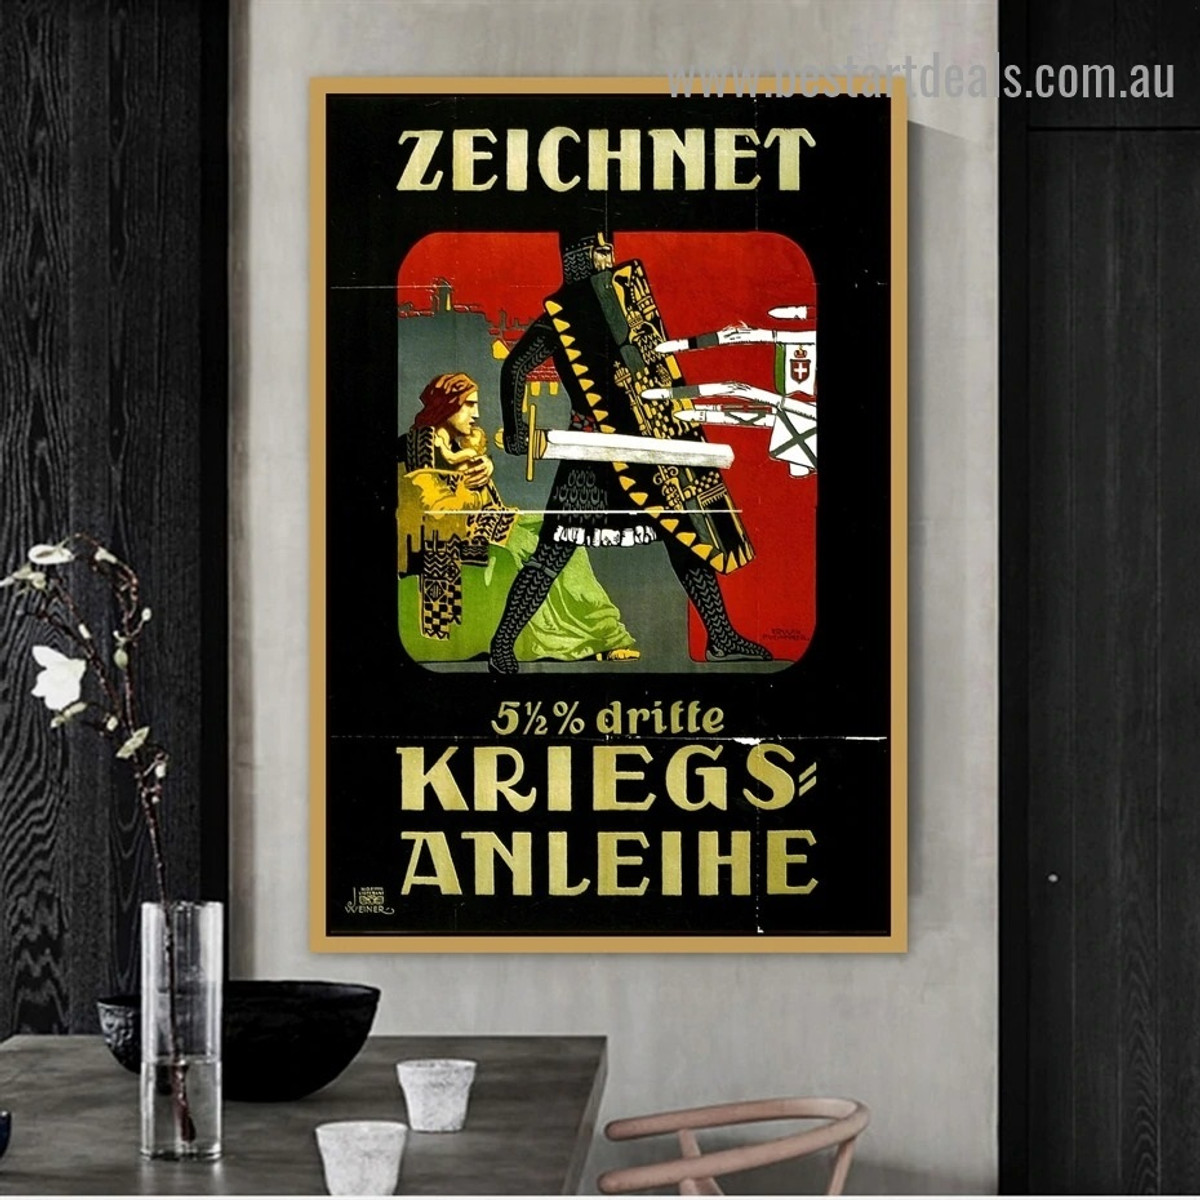 Zeichnet Figure Vintage Advertisement Poster Reproduction Artwork Painting Canvas Print for Room Wall Decoration